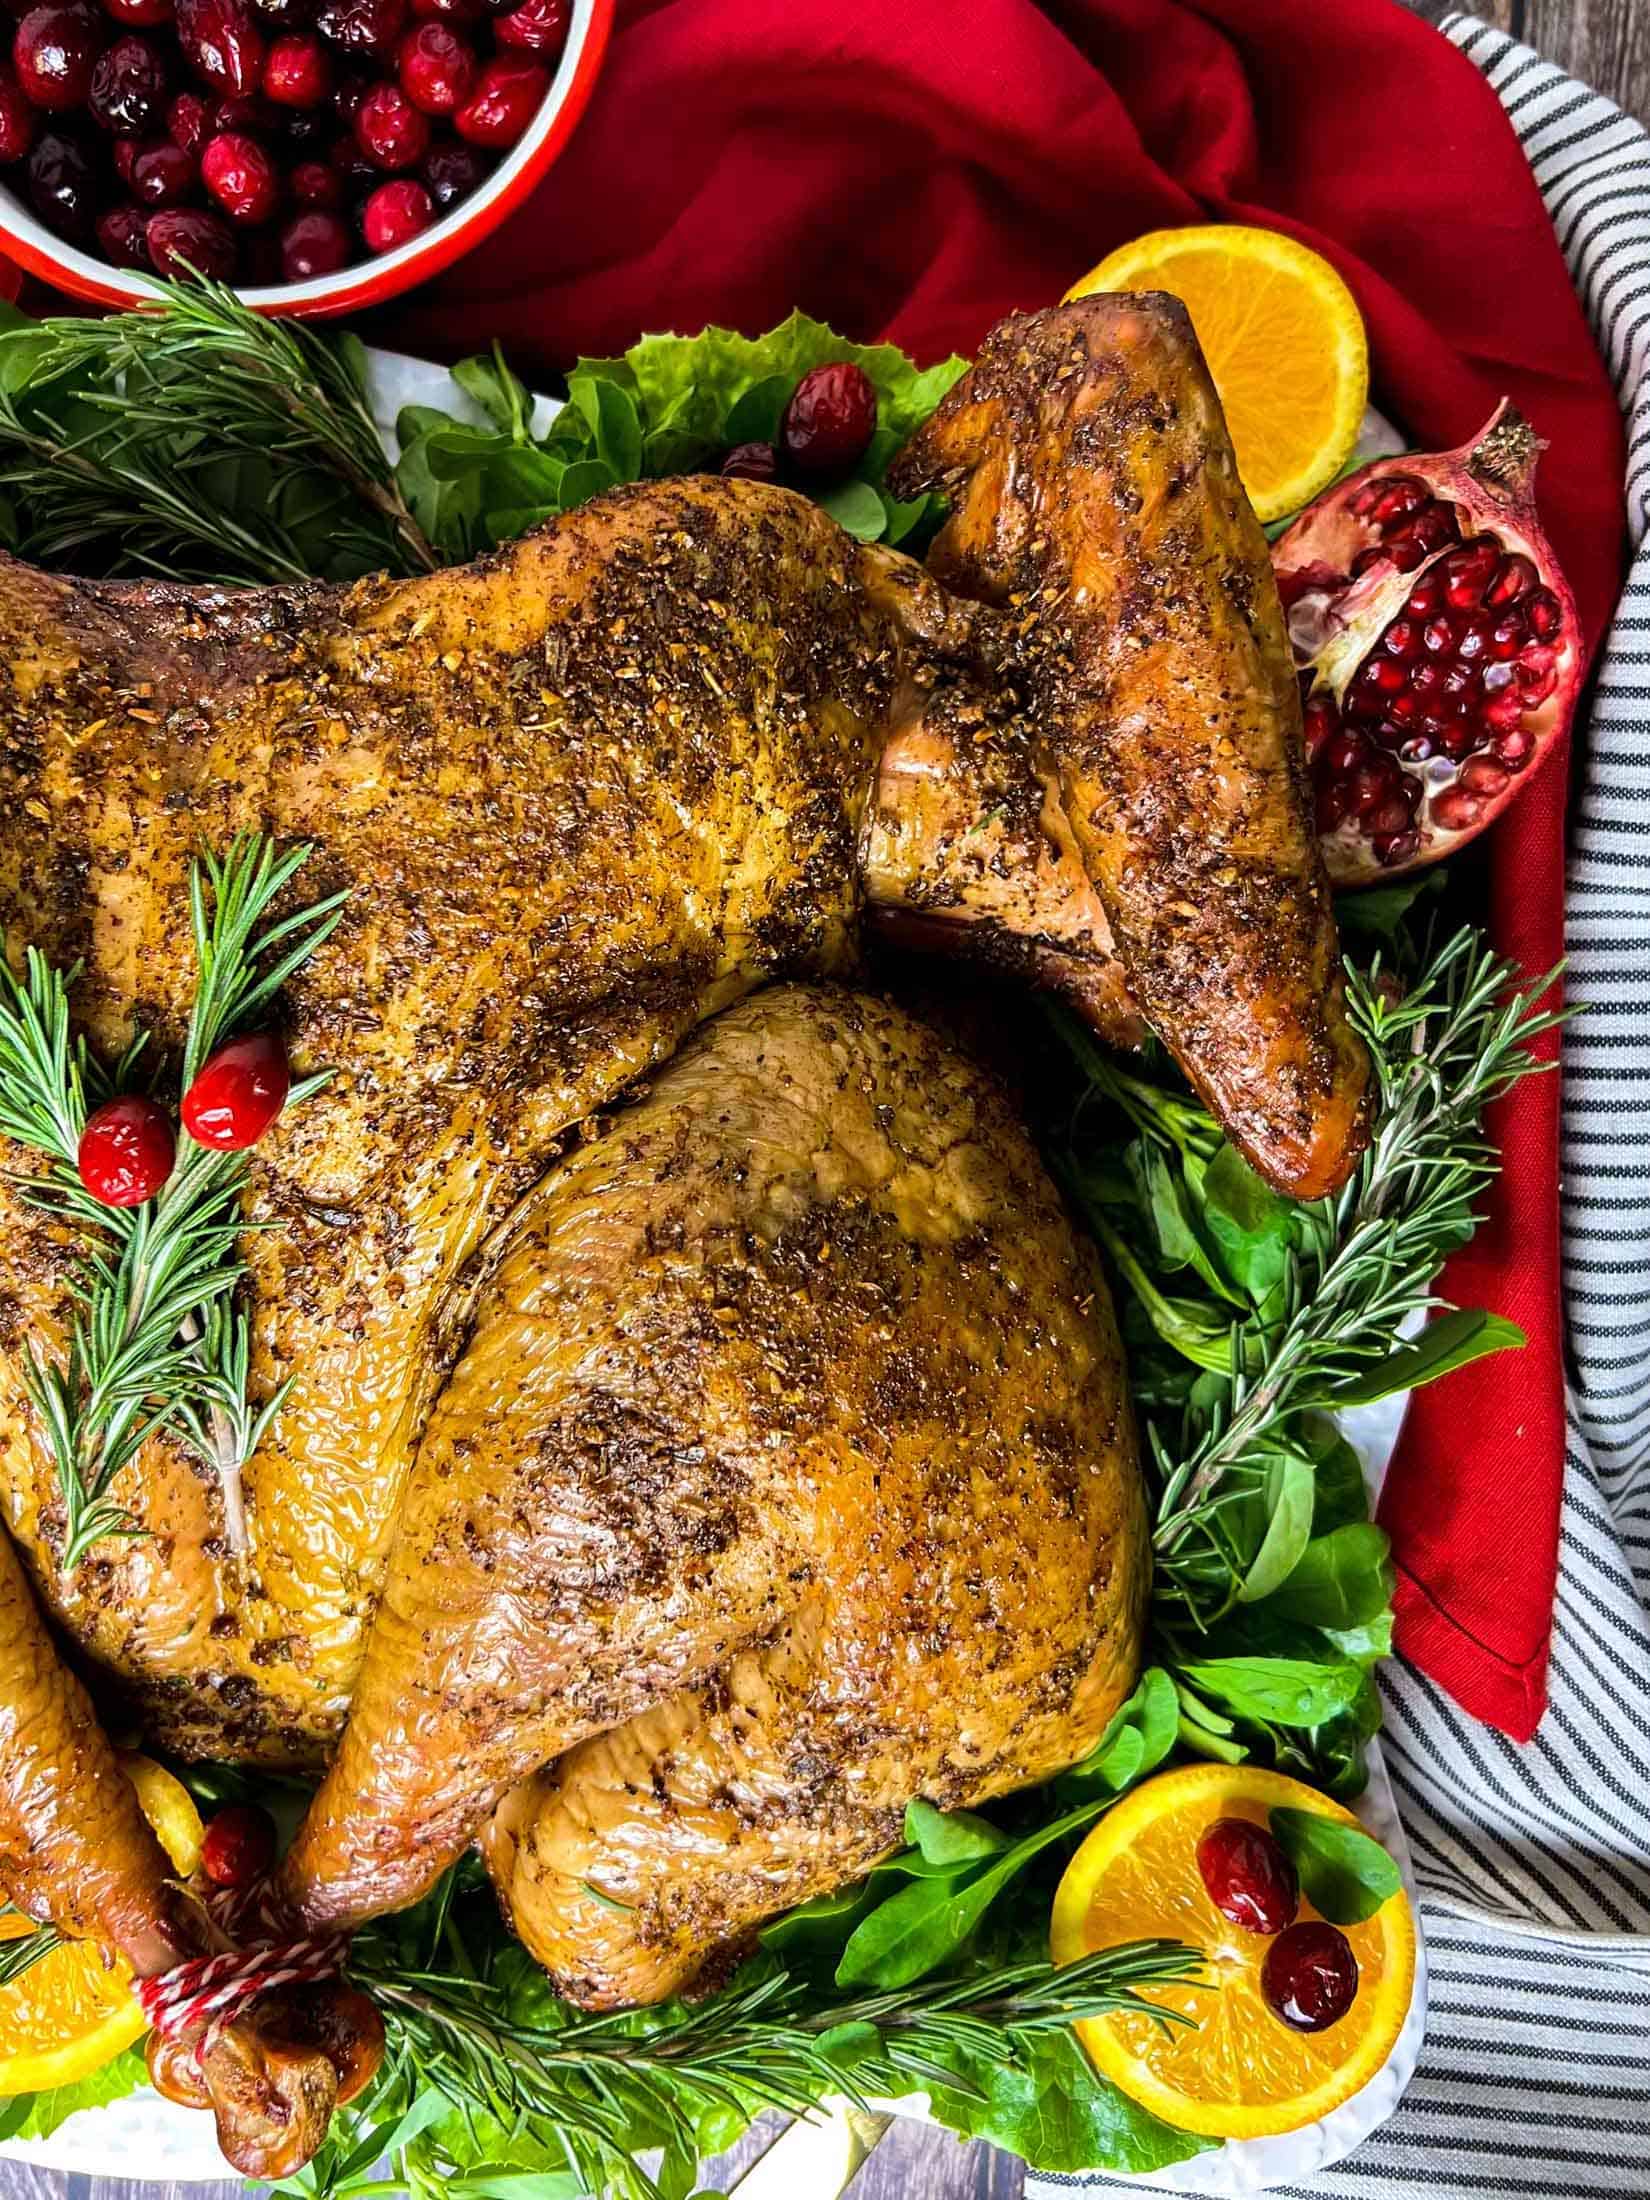 Smoked spatchcocked turkey with rosemary, cranberries, orange peels, and greens.